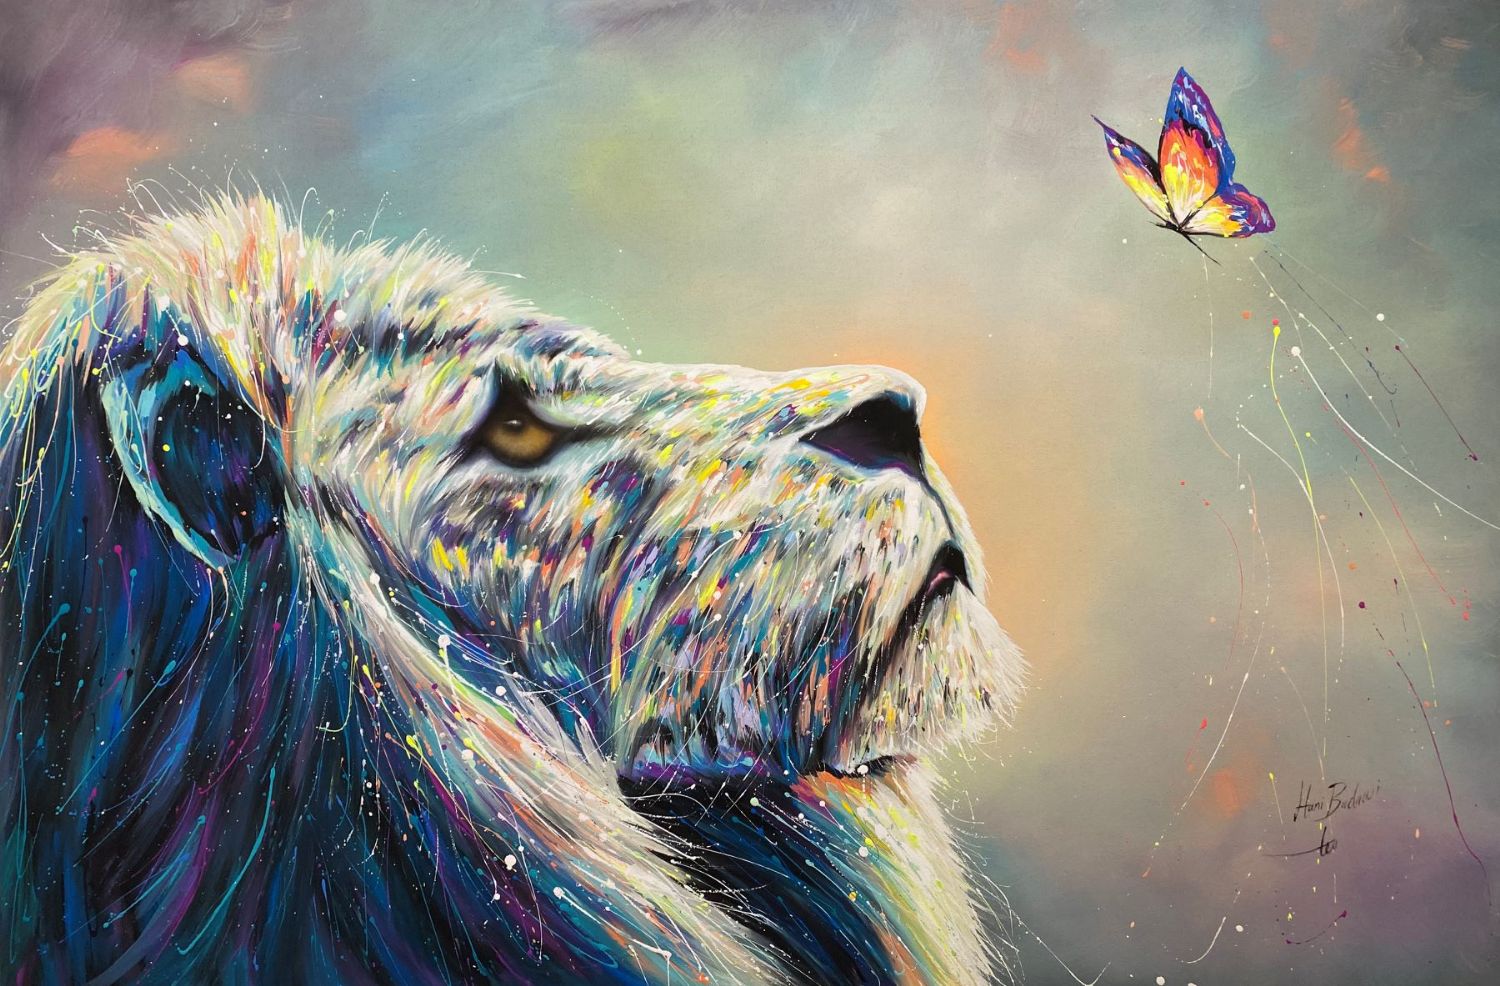 The friendship of the Lion and Butterfly